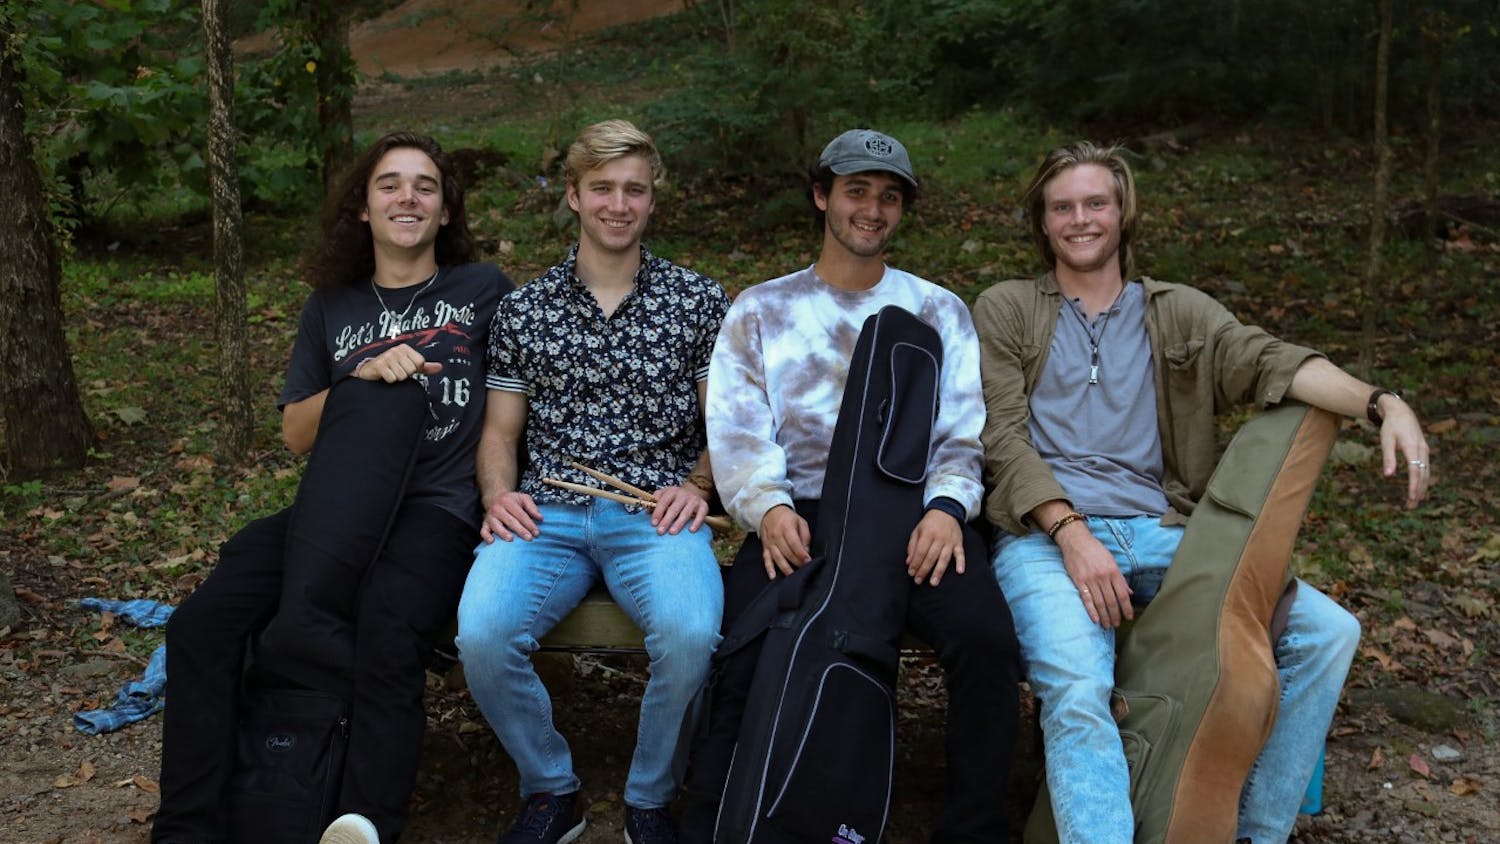 The members of “The Third Floor” band from left to right: Nick Guzman, Logan Cory, Neal Goldberg and Ryan Pellatt pose together with their instruments on Oct. 7, 2022. The band members use their music as a way to express their emotions and bring light to issues concerning mental health.